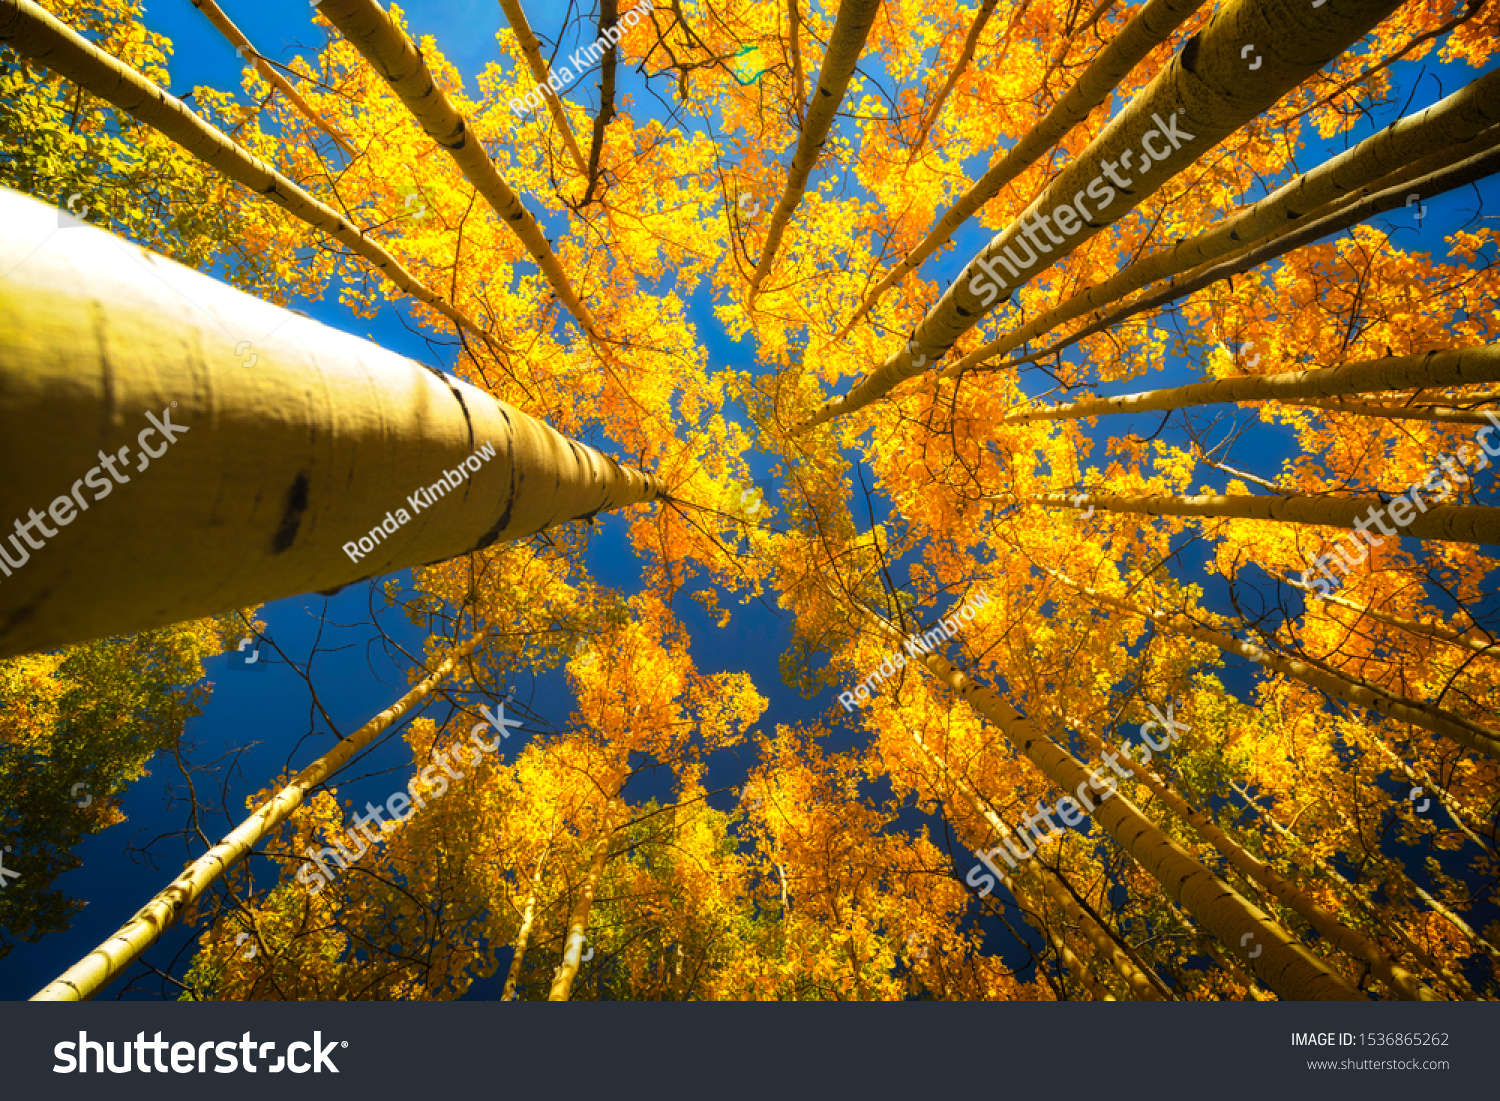 Upper view of the Aspen trees in the fall season with clear blue skies showing through #1536865262